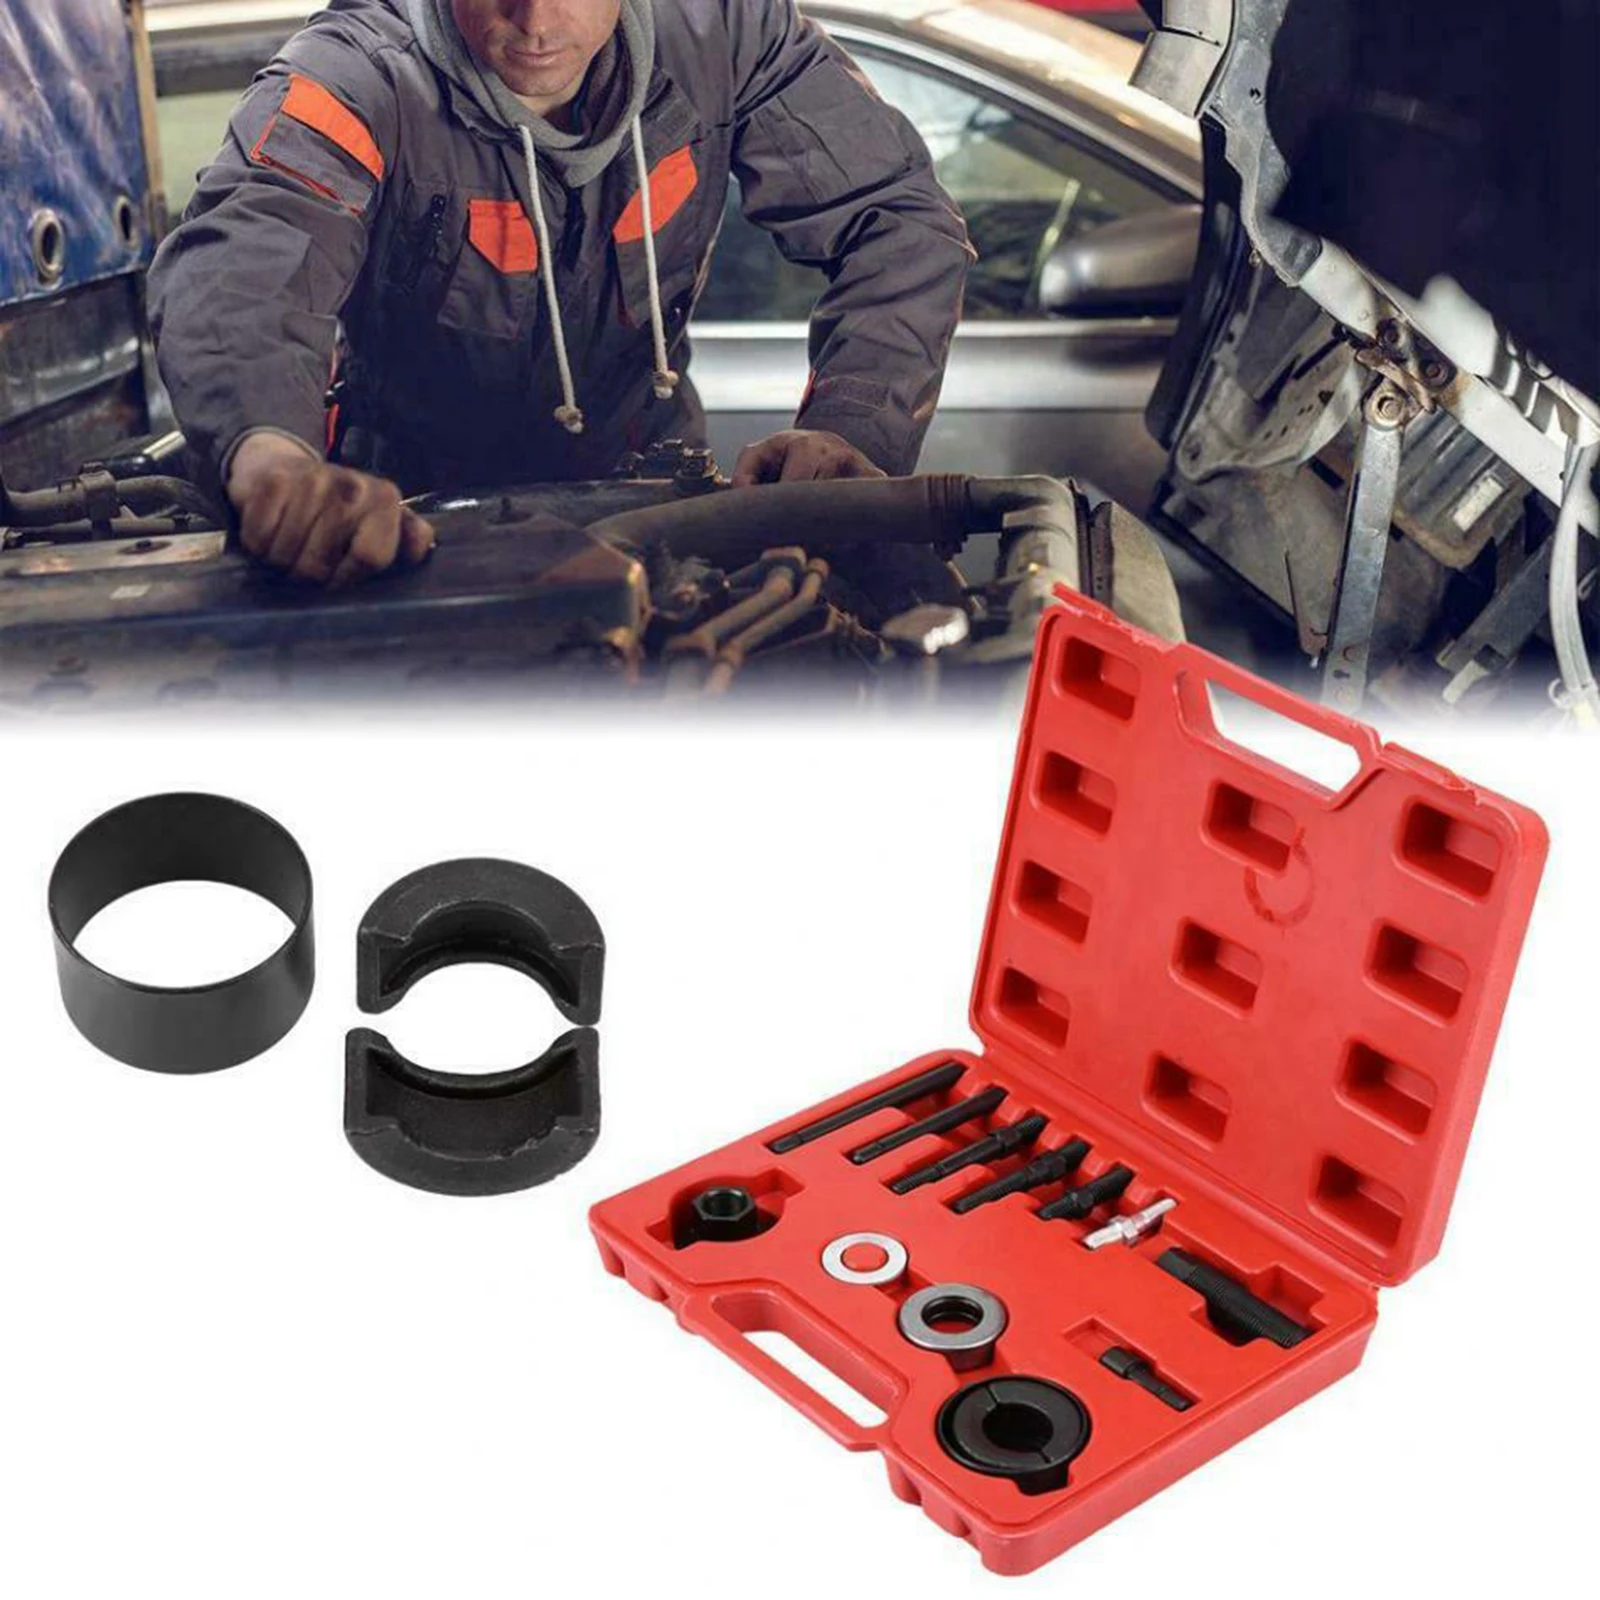 

Alternator Pulley Remover Removal Puller Pry Auto Repair Tool Installer Kit Anti-rust Automobiles Garage Tools Removal Multitool